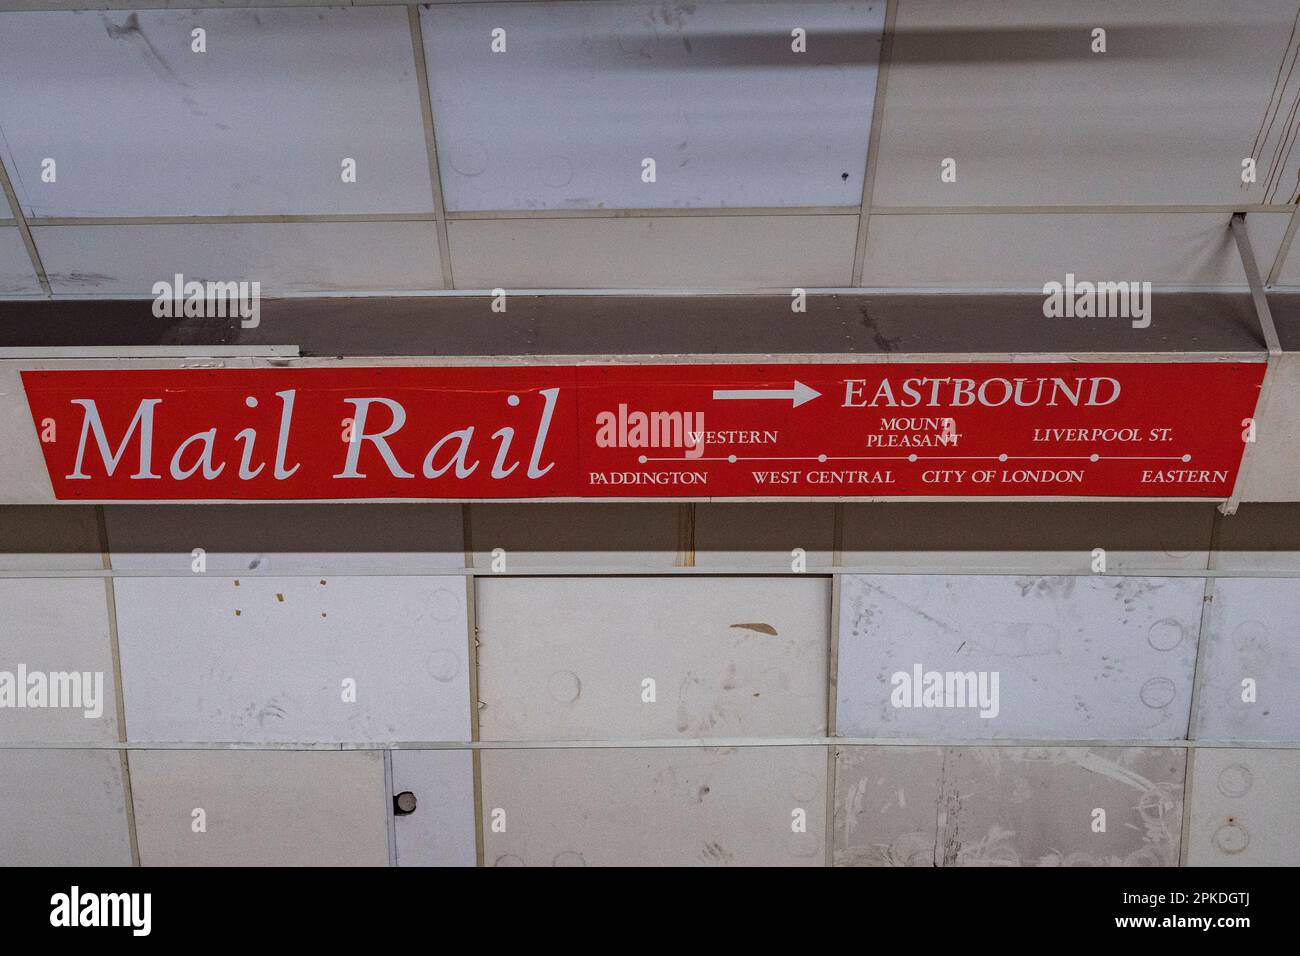 Mail Rail sign on the Mount Pleasant eastbound platform, the former Post Office Railway system under the streets of central London, UK. Stock Photo